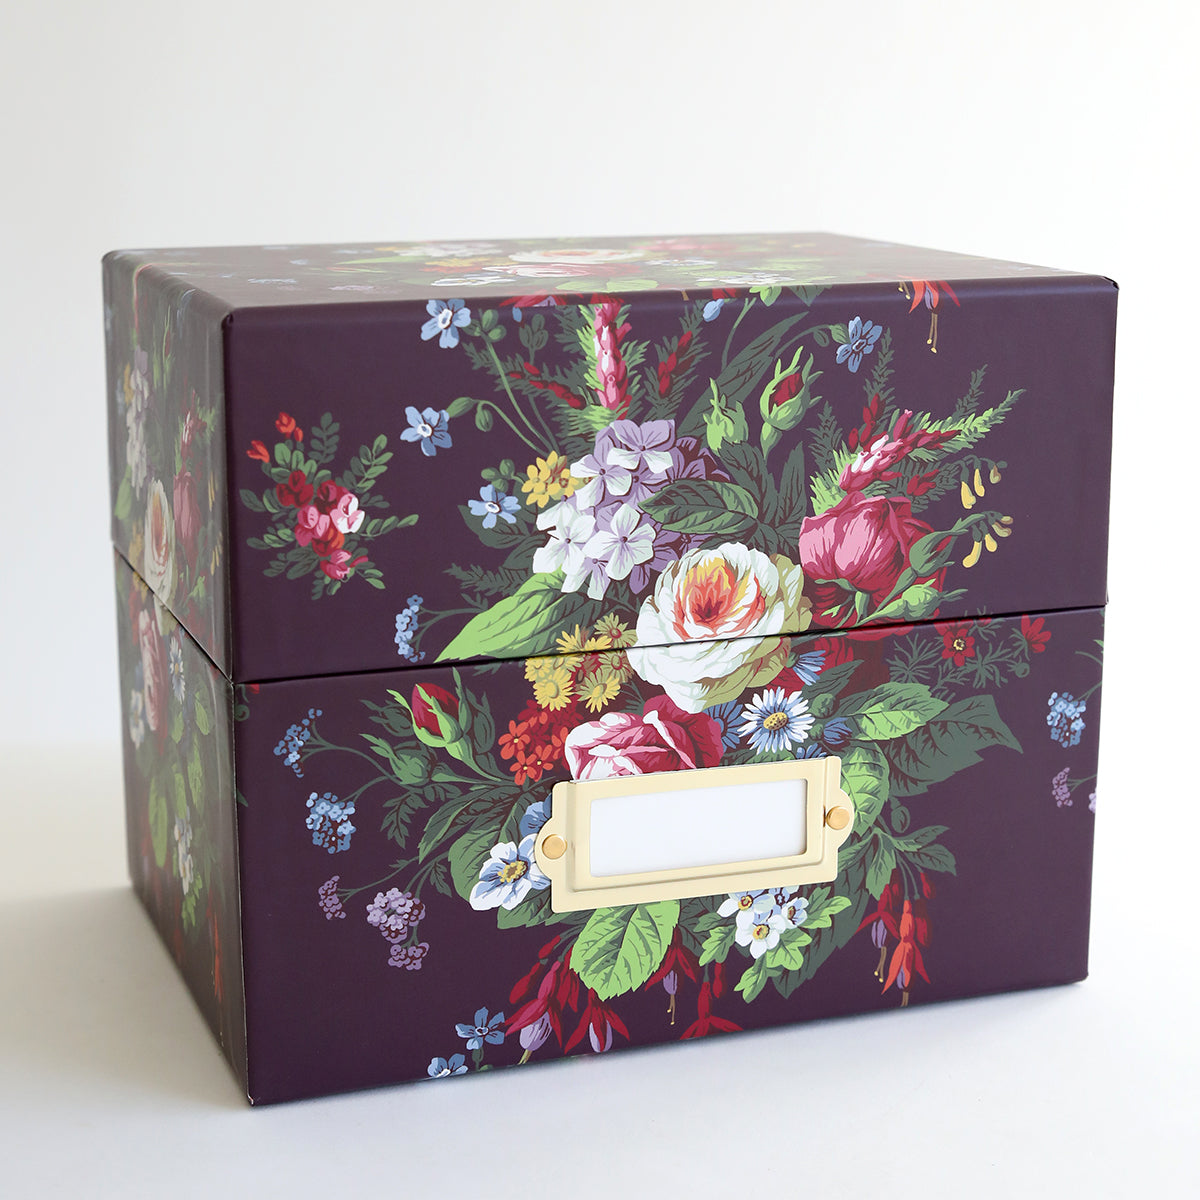 A purple box with a floral design on it. Featuring an Anna Griffin design, this Die Storage Box - Astrid Floral Pattern is the perfect option for organizing and storing your magnetic pages.